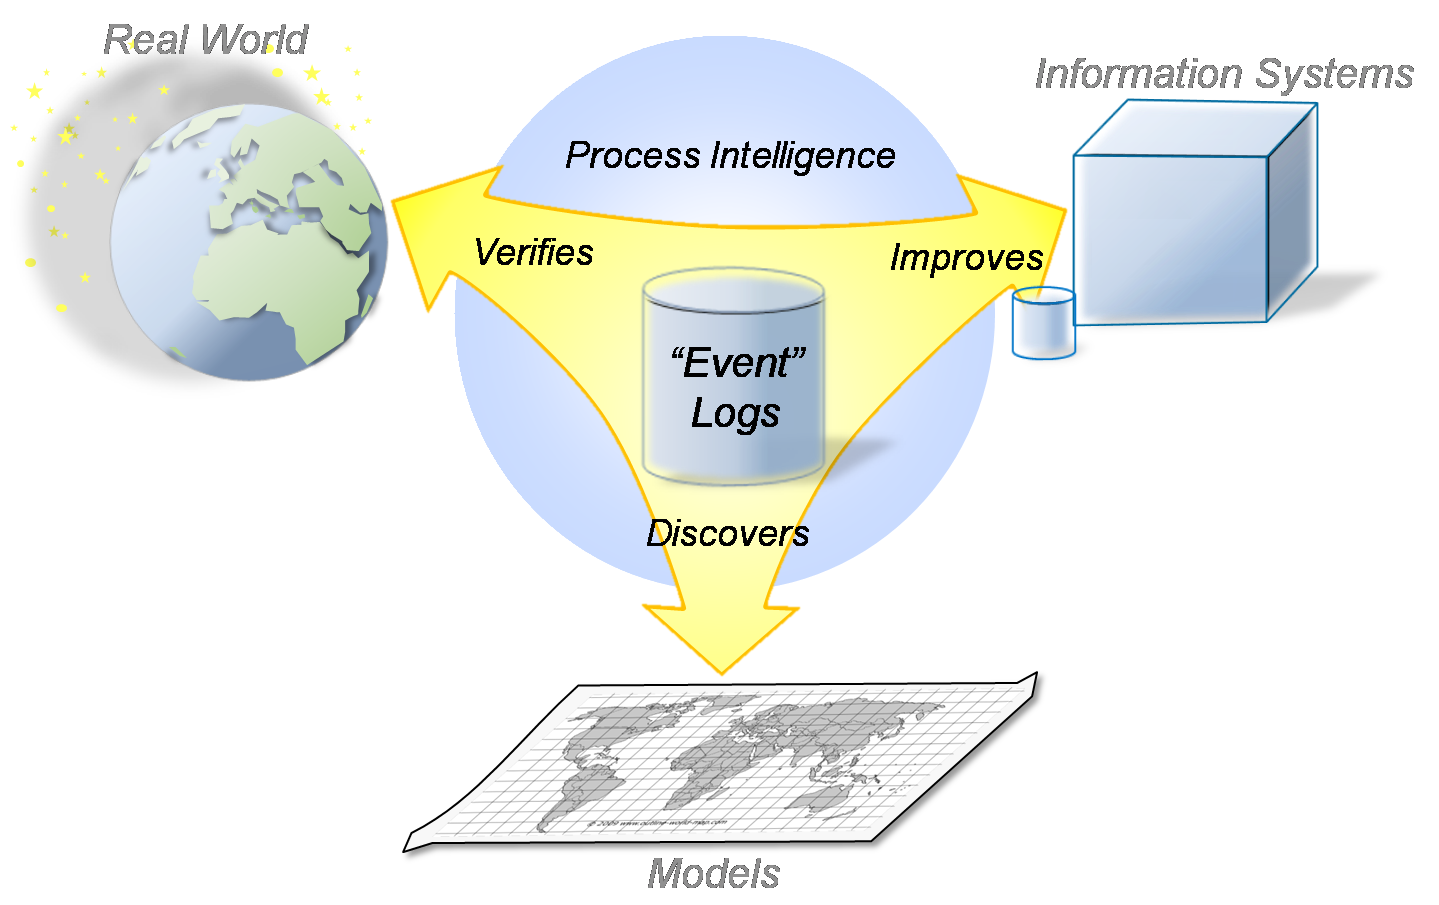 Information Systems produce event logs and contain operational data